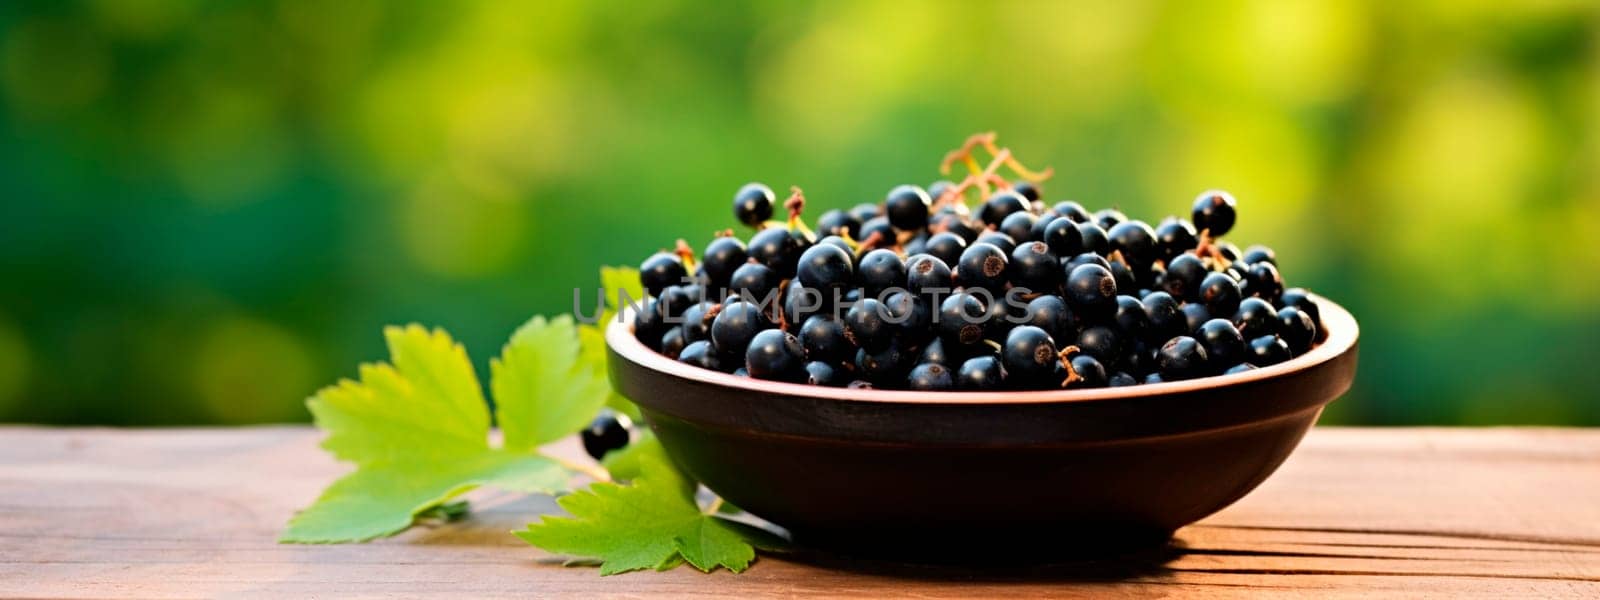 Black currant berries in a bowl against the backdrop of the garden. Selective focus. by yanadjana